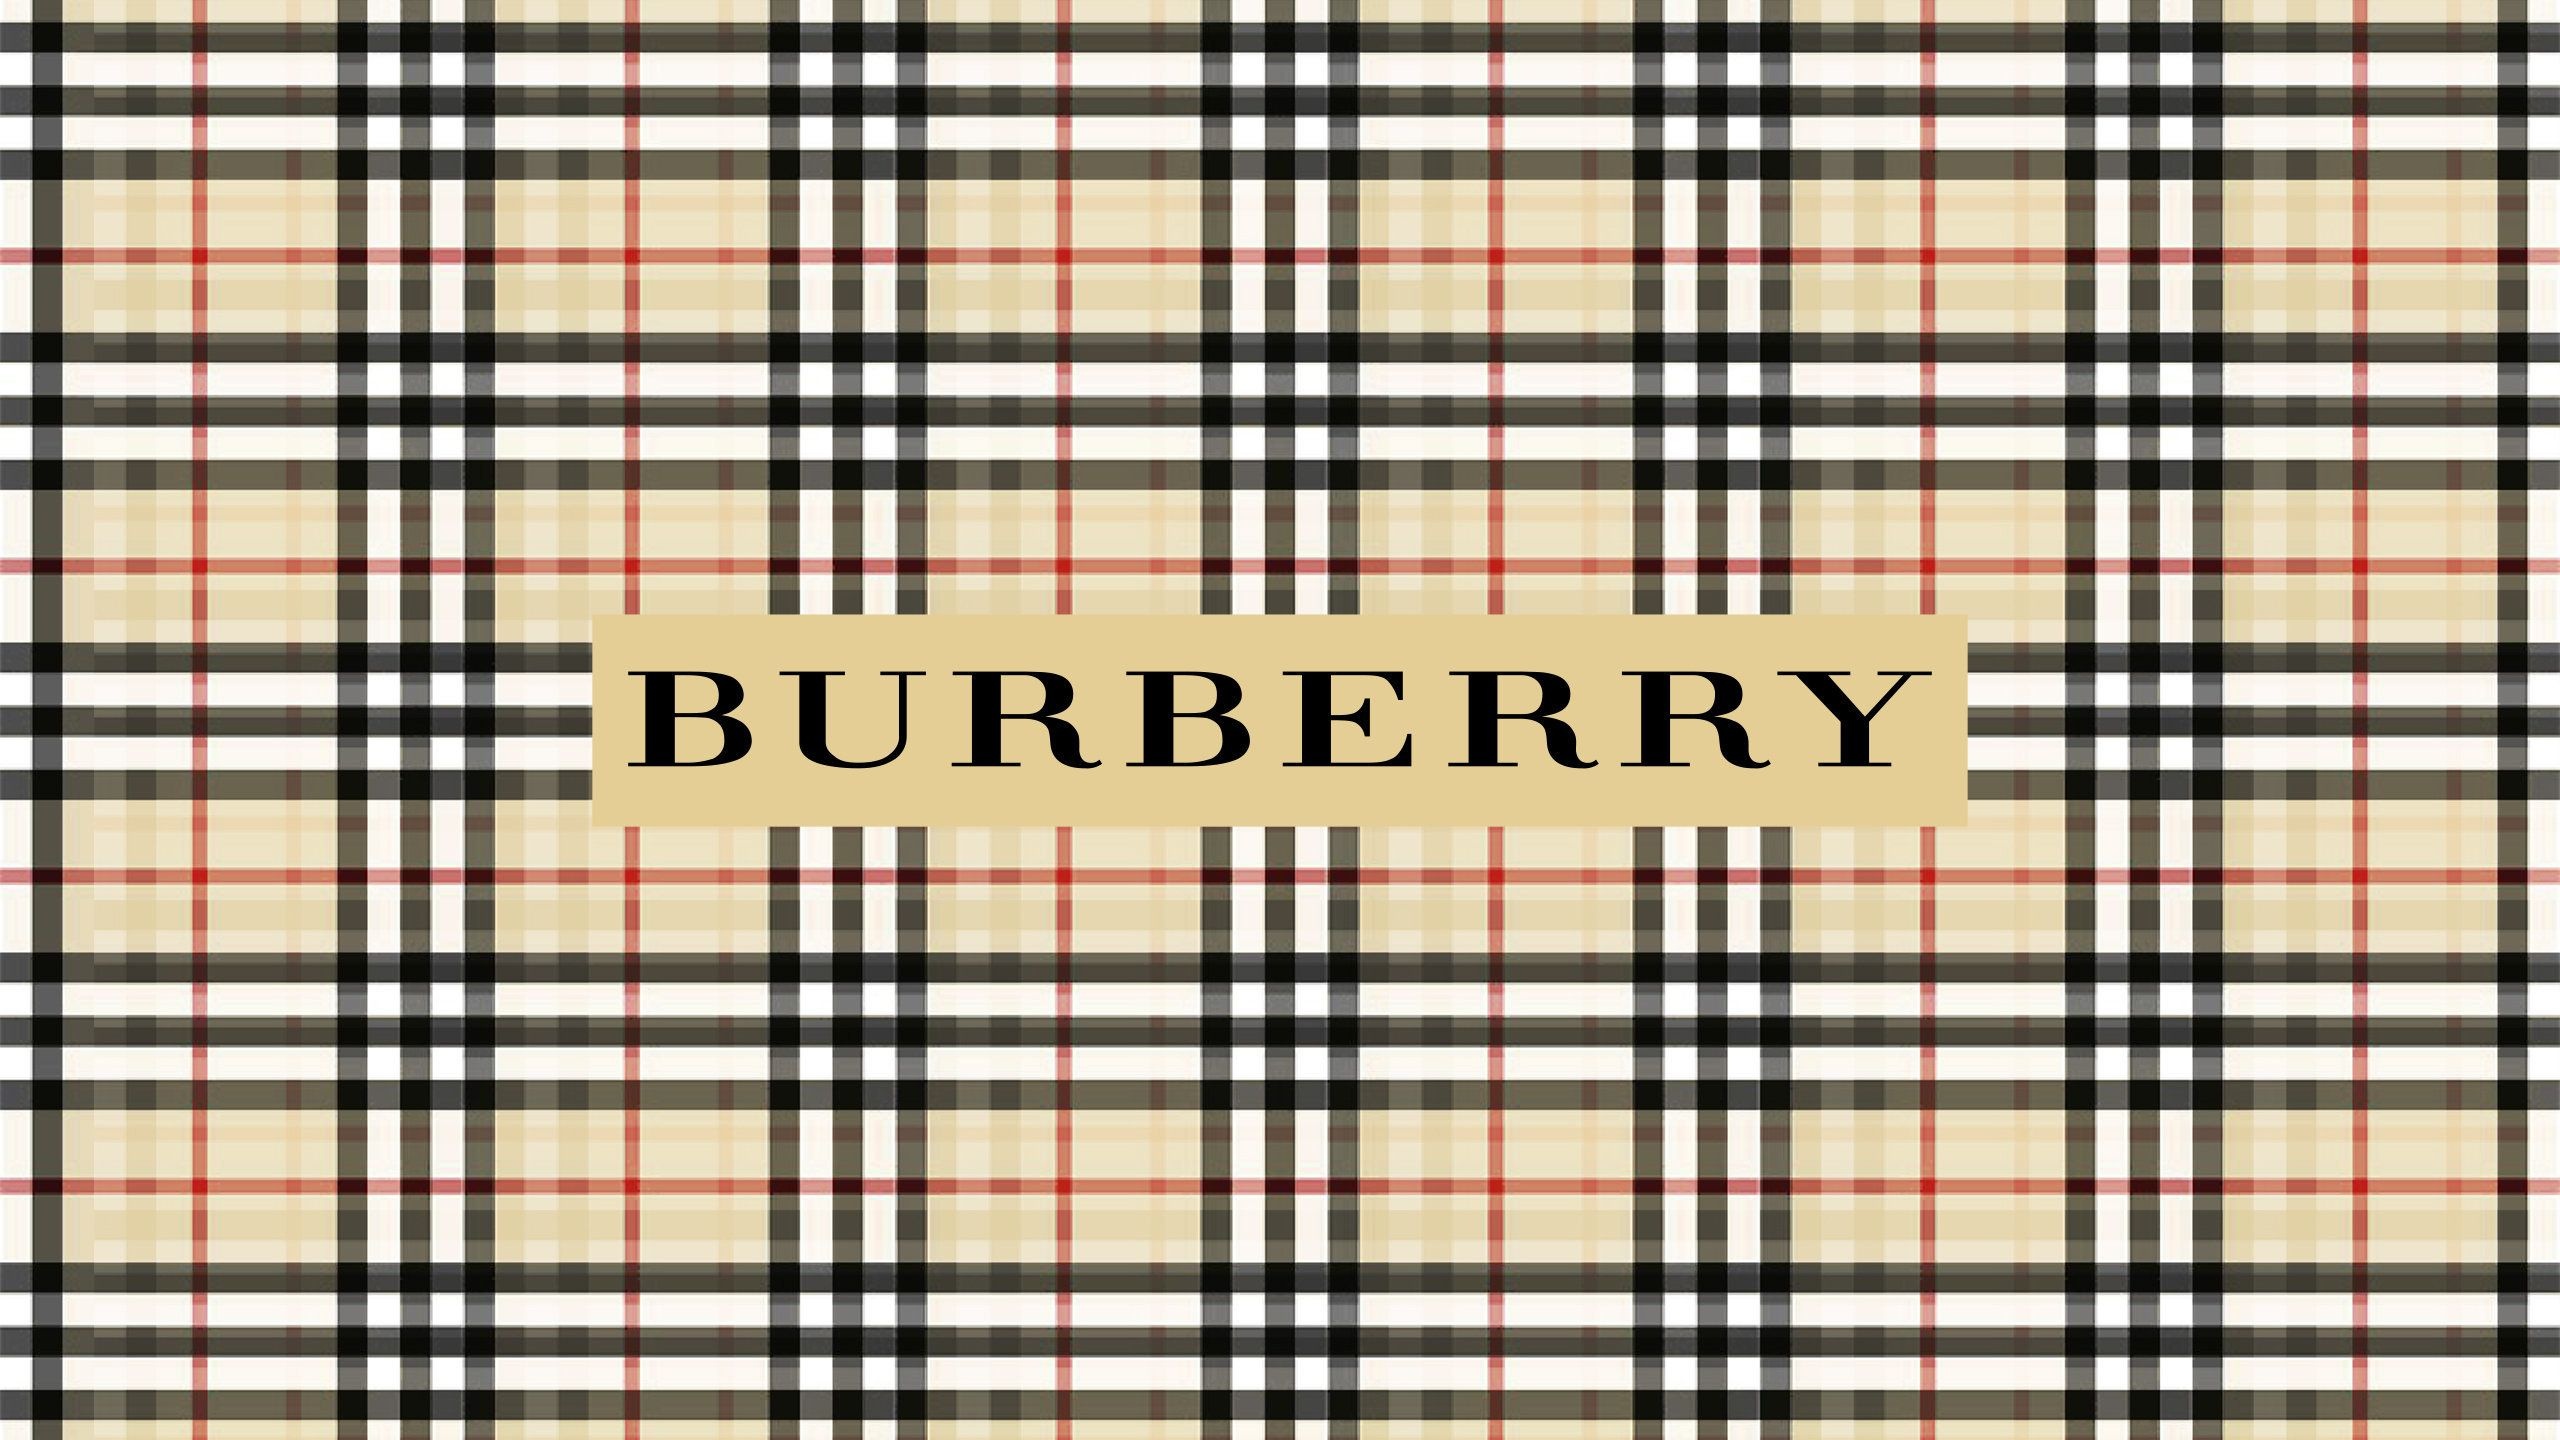 Burberry: One of the most recognizable signifiers of the brand, The world's top designer houses. 2560x1440 HD Background.